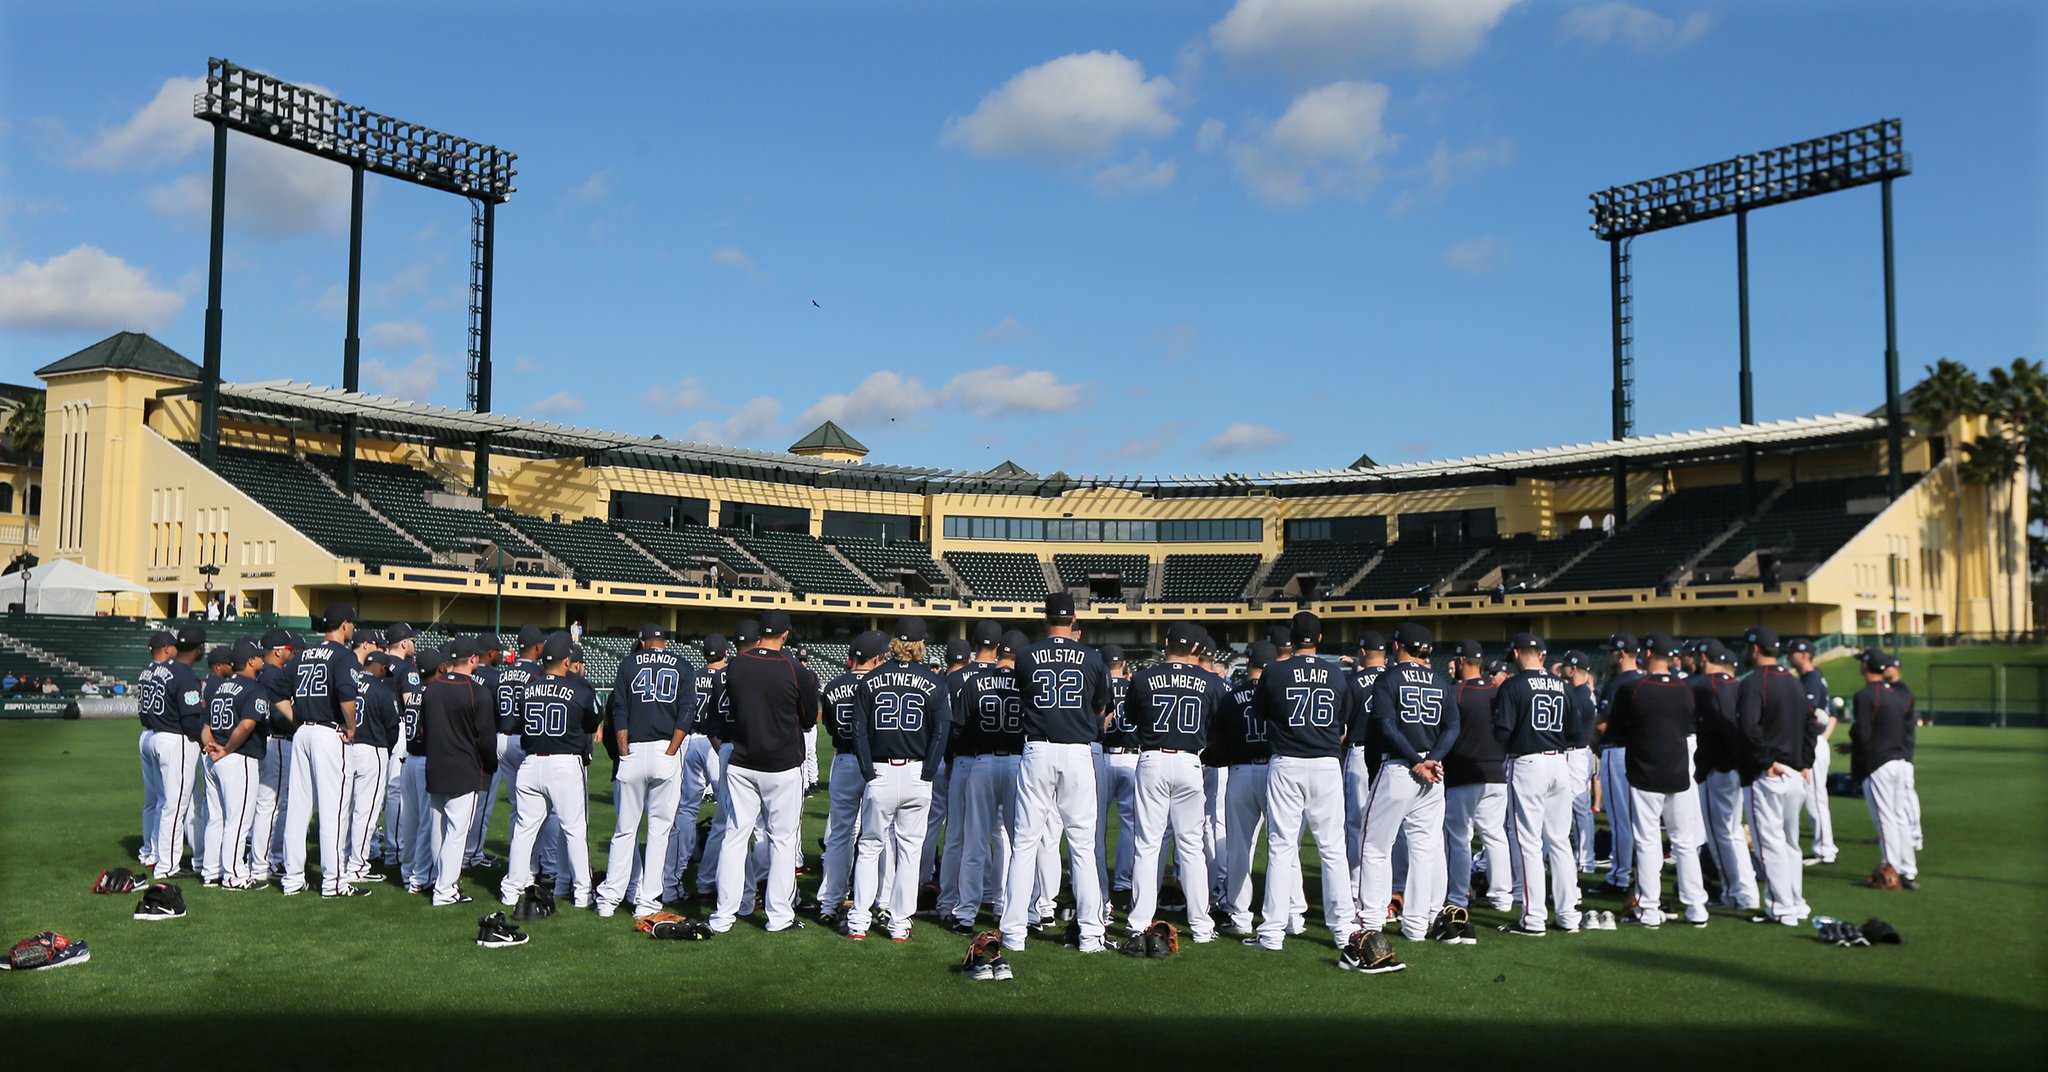 Spring Training and the Braves